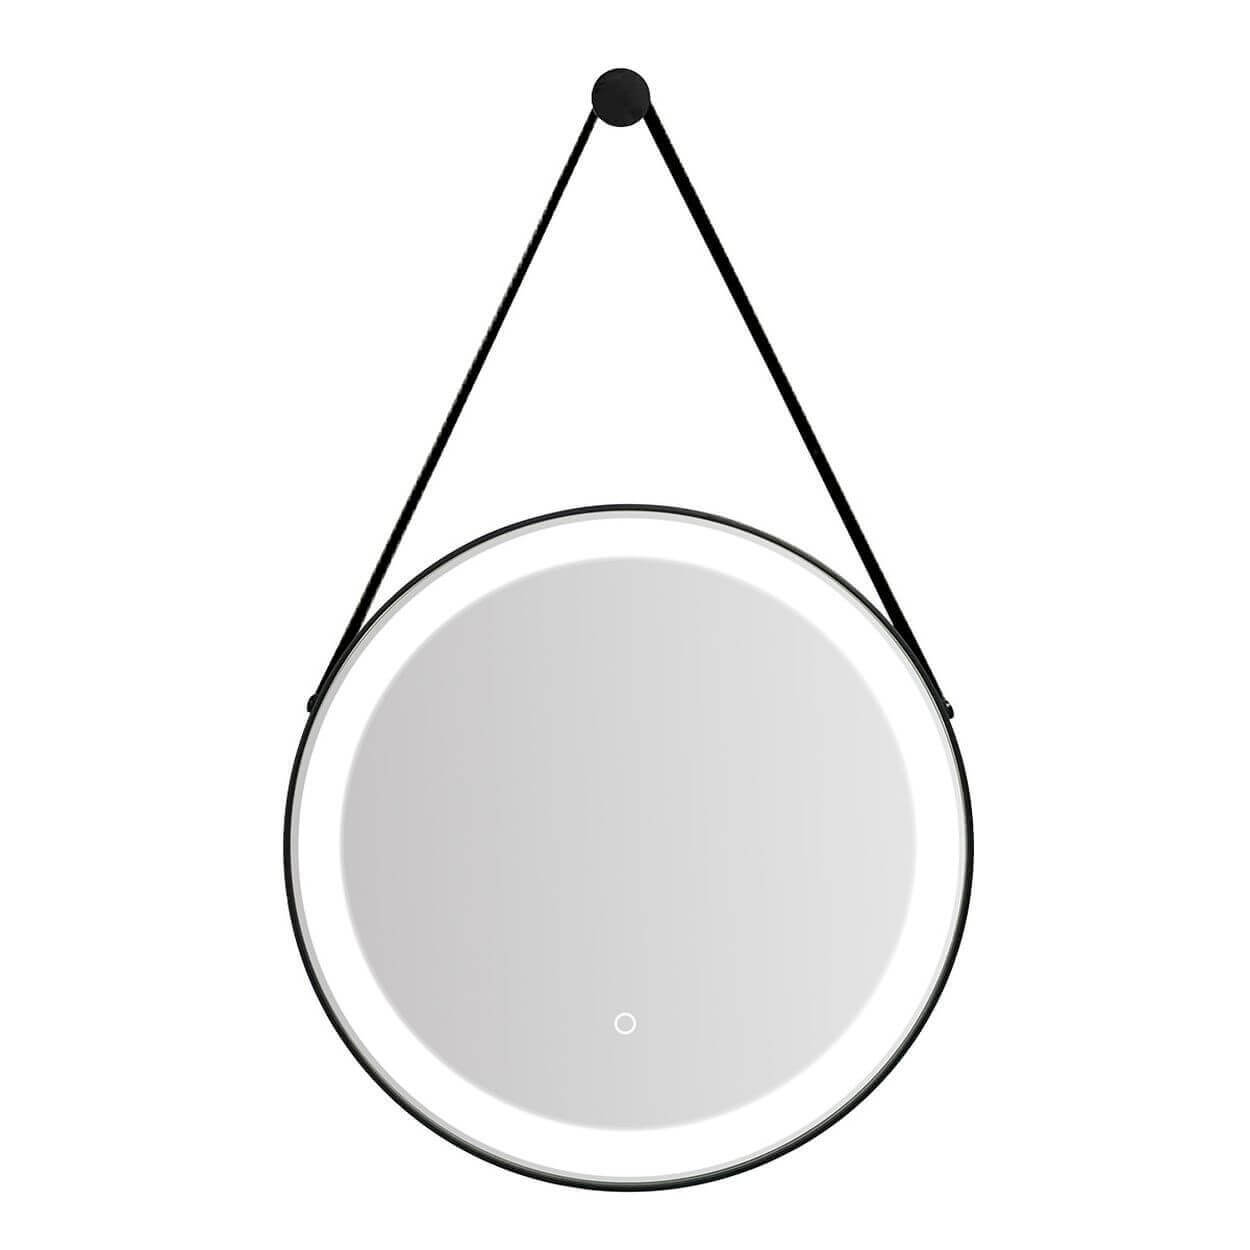 A round LED mirror on a black strap.